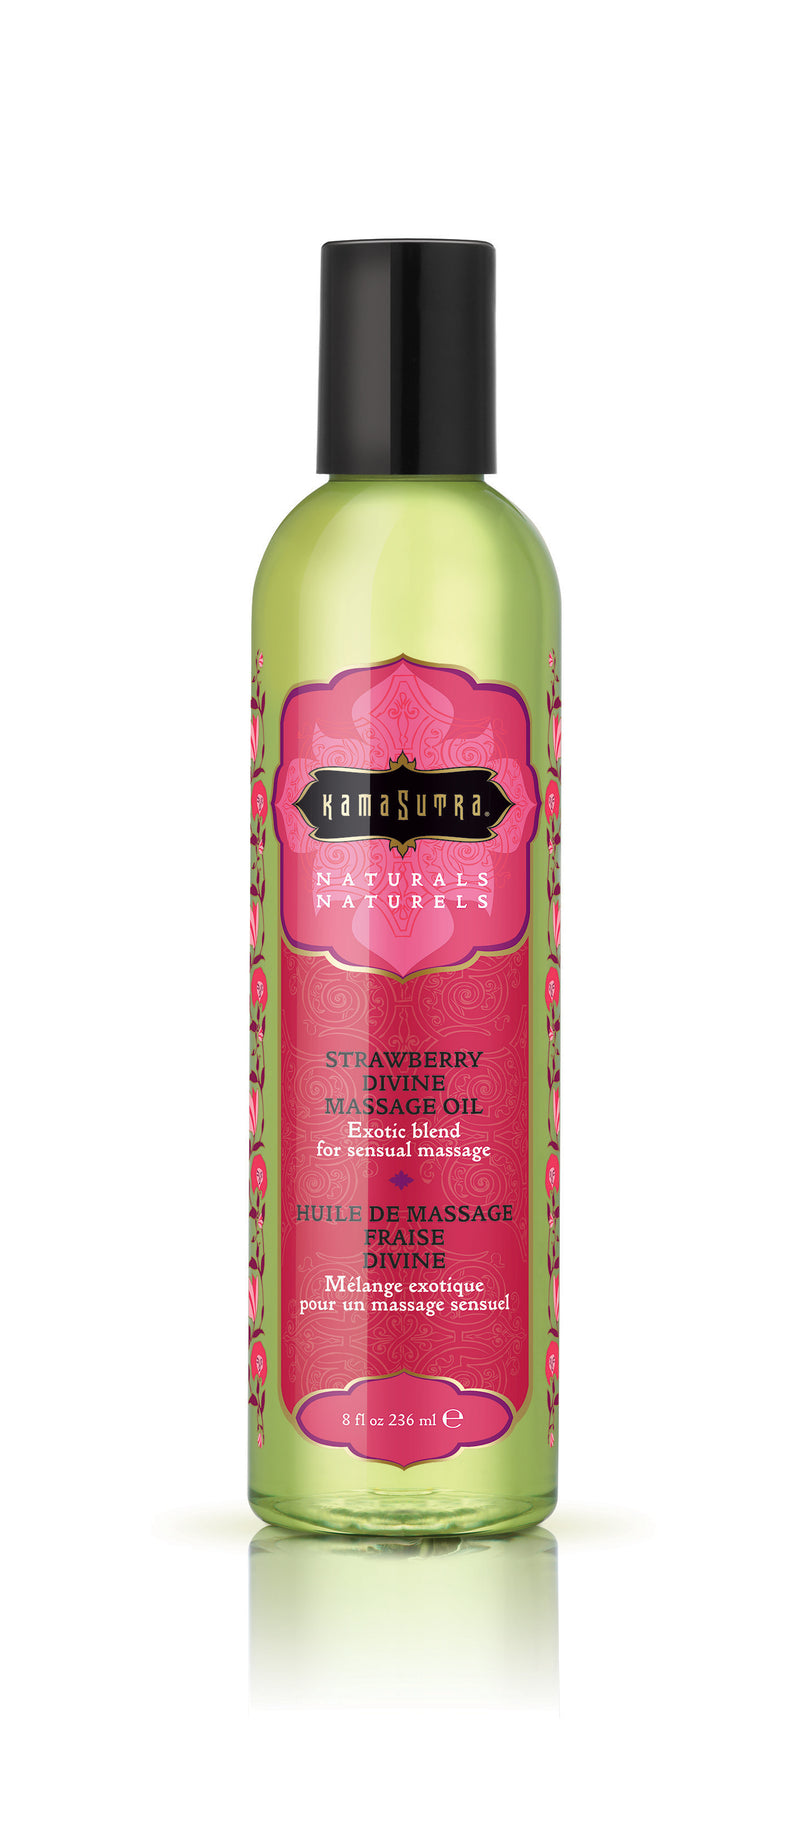 Kama Sutra NATURALS MASSAGE OIL STRAWBERRY at $13.99